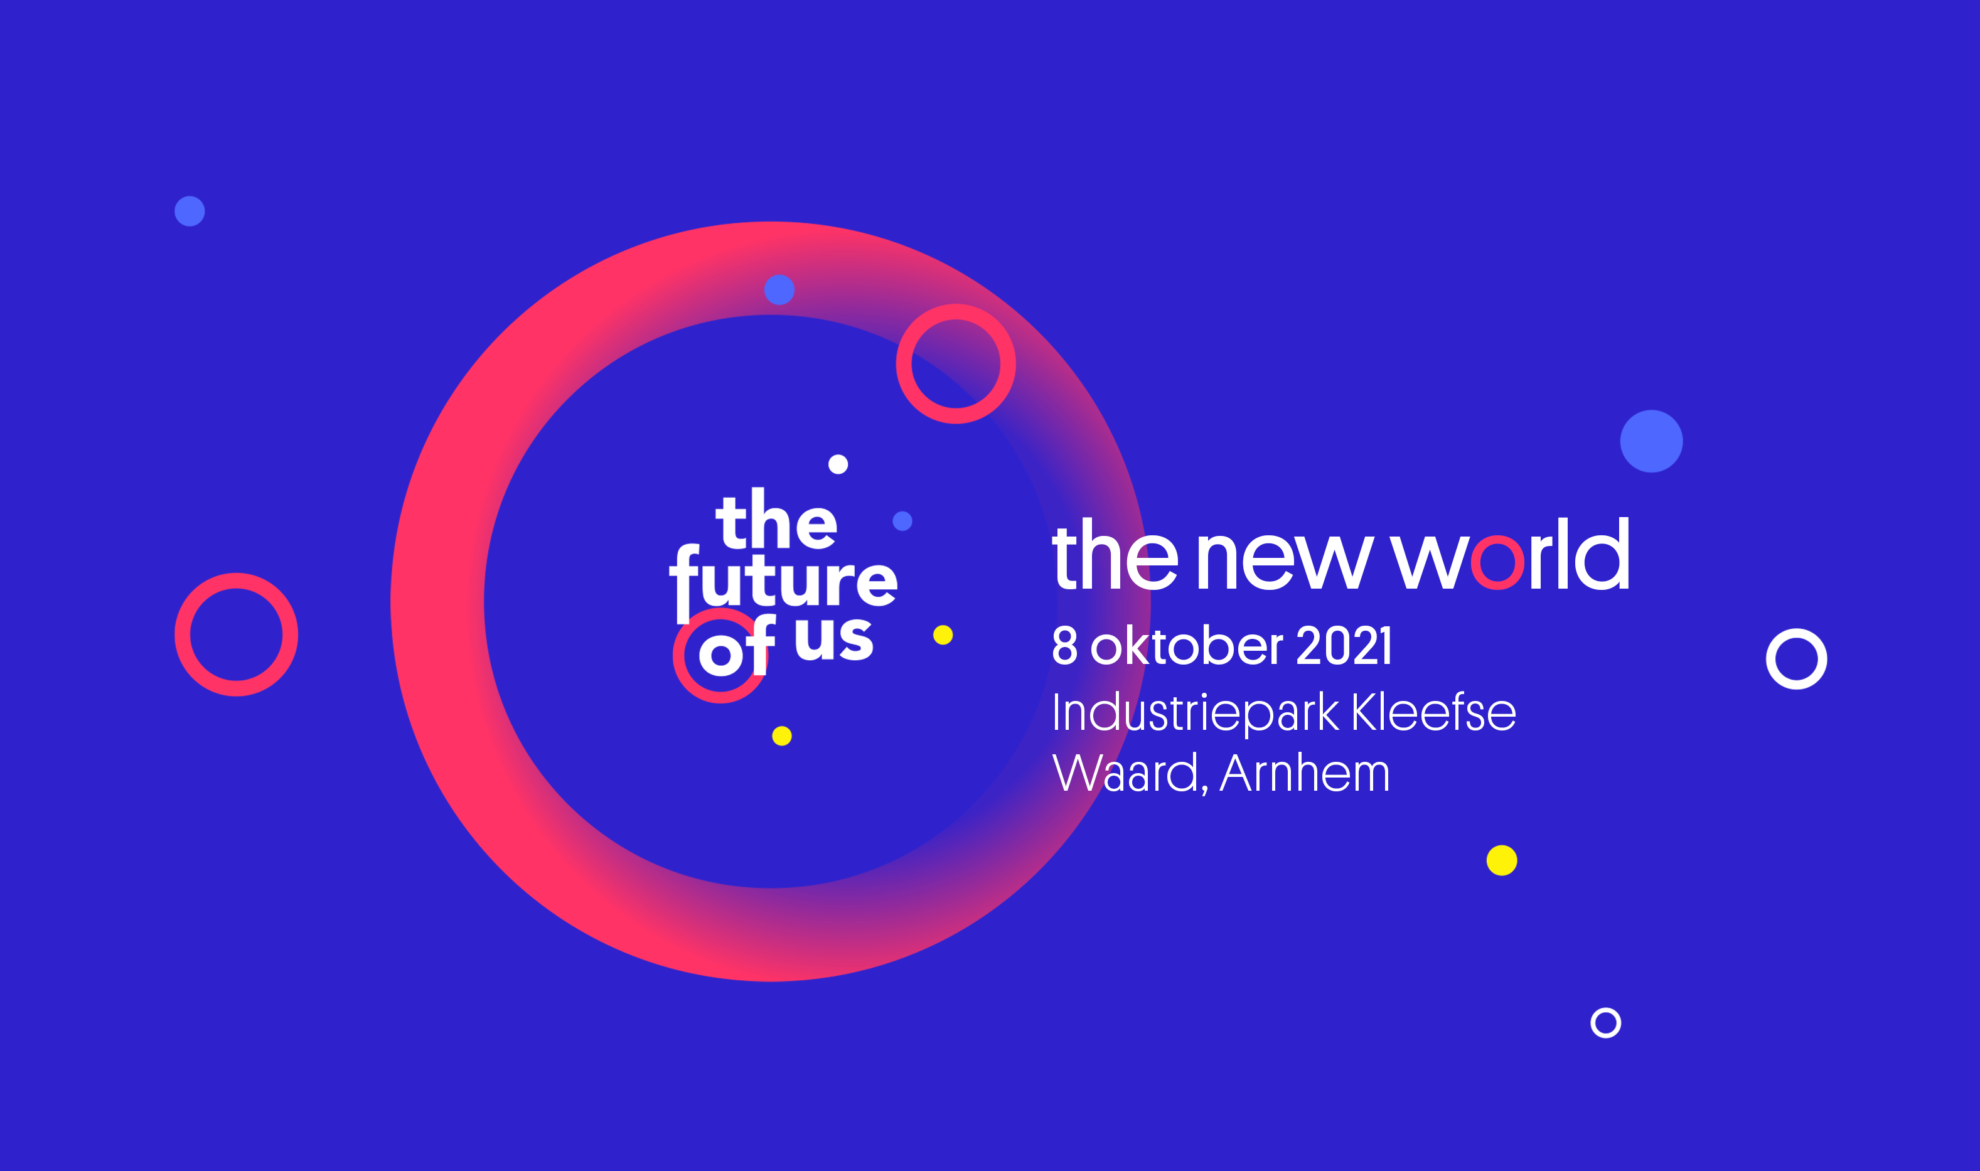 The Future of Us – The New World: 8 oktober